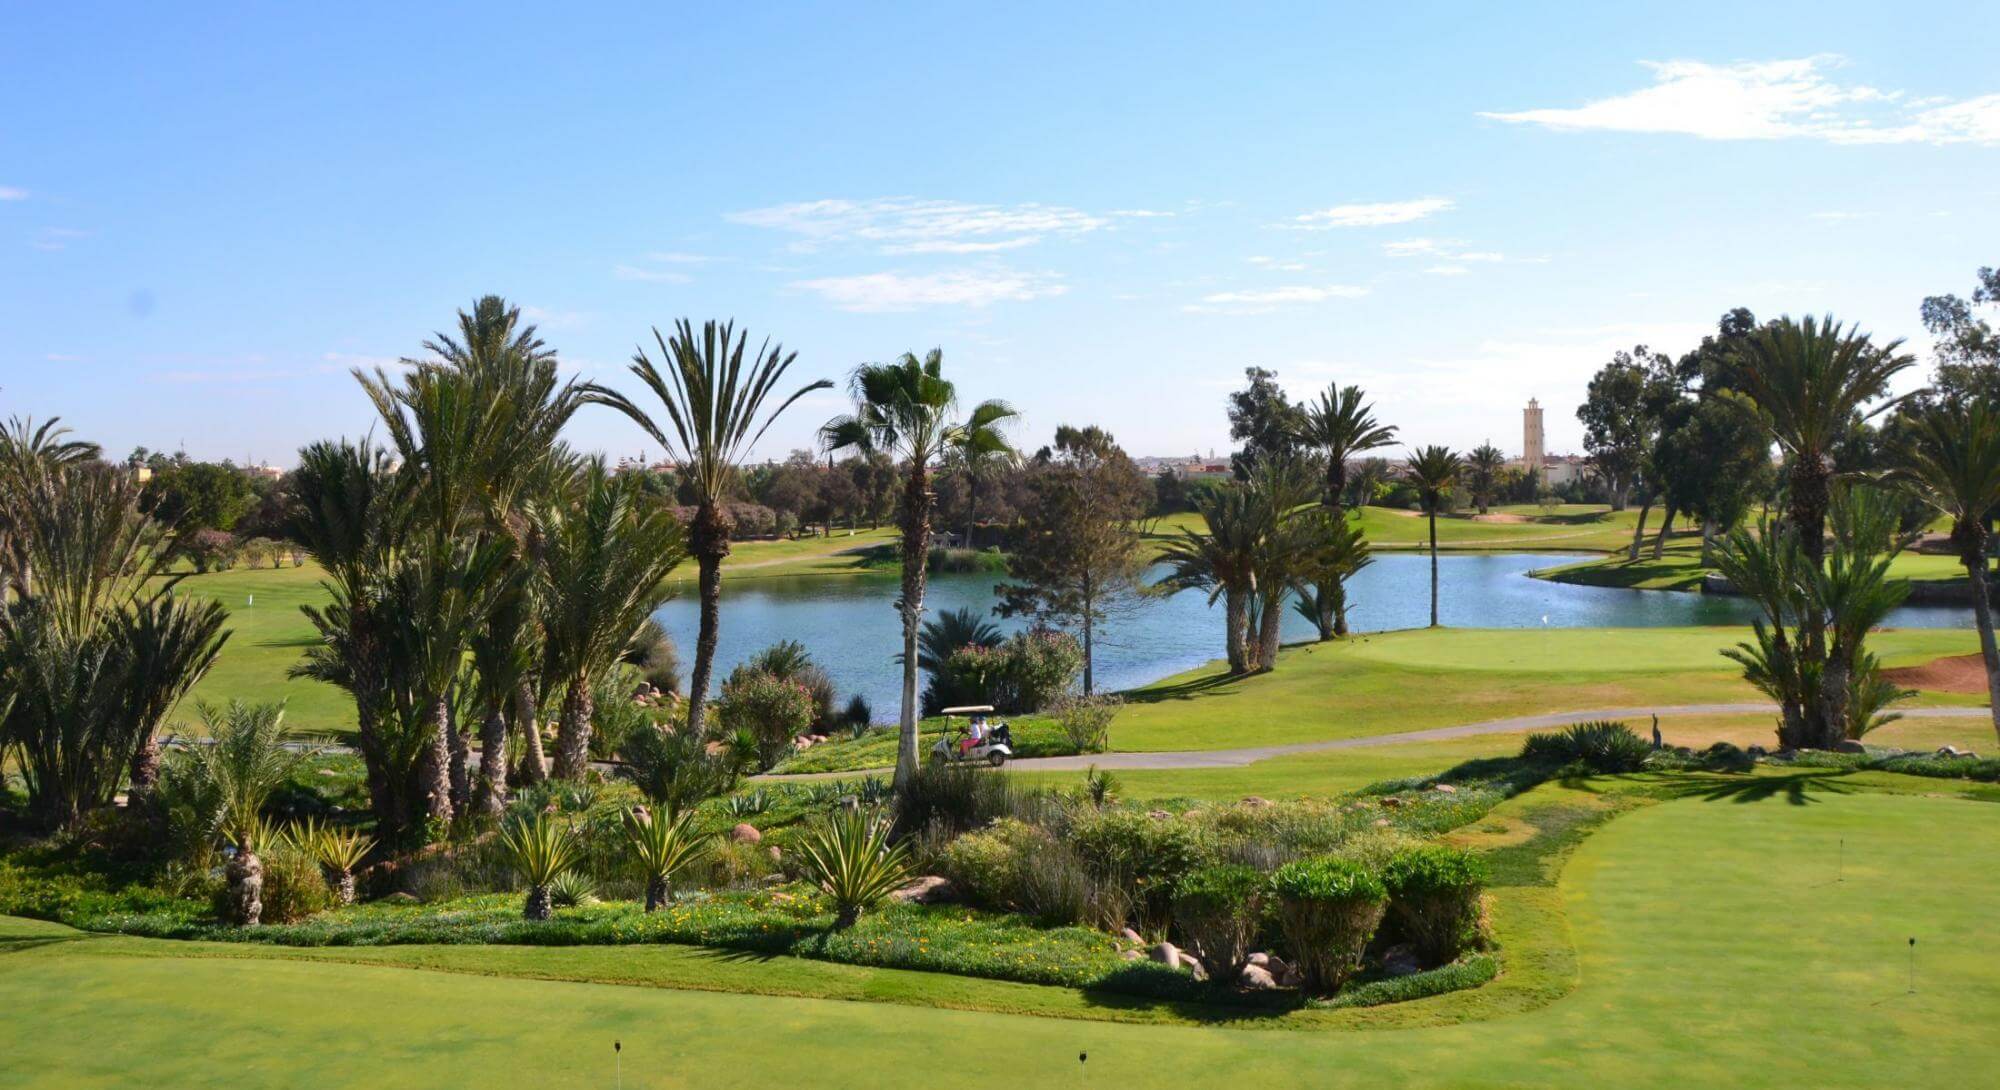 The golf du soleils lovely golf course in sensational morocco